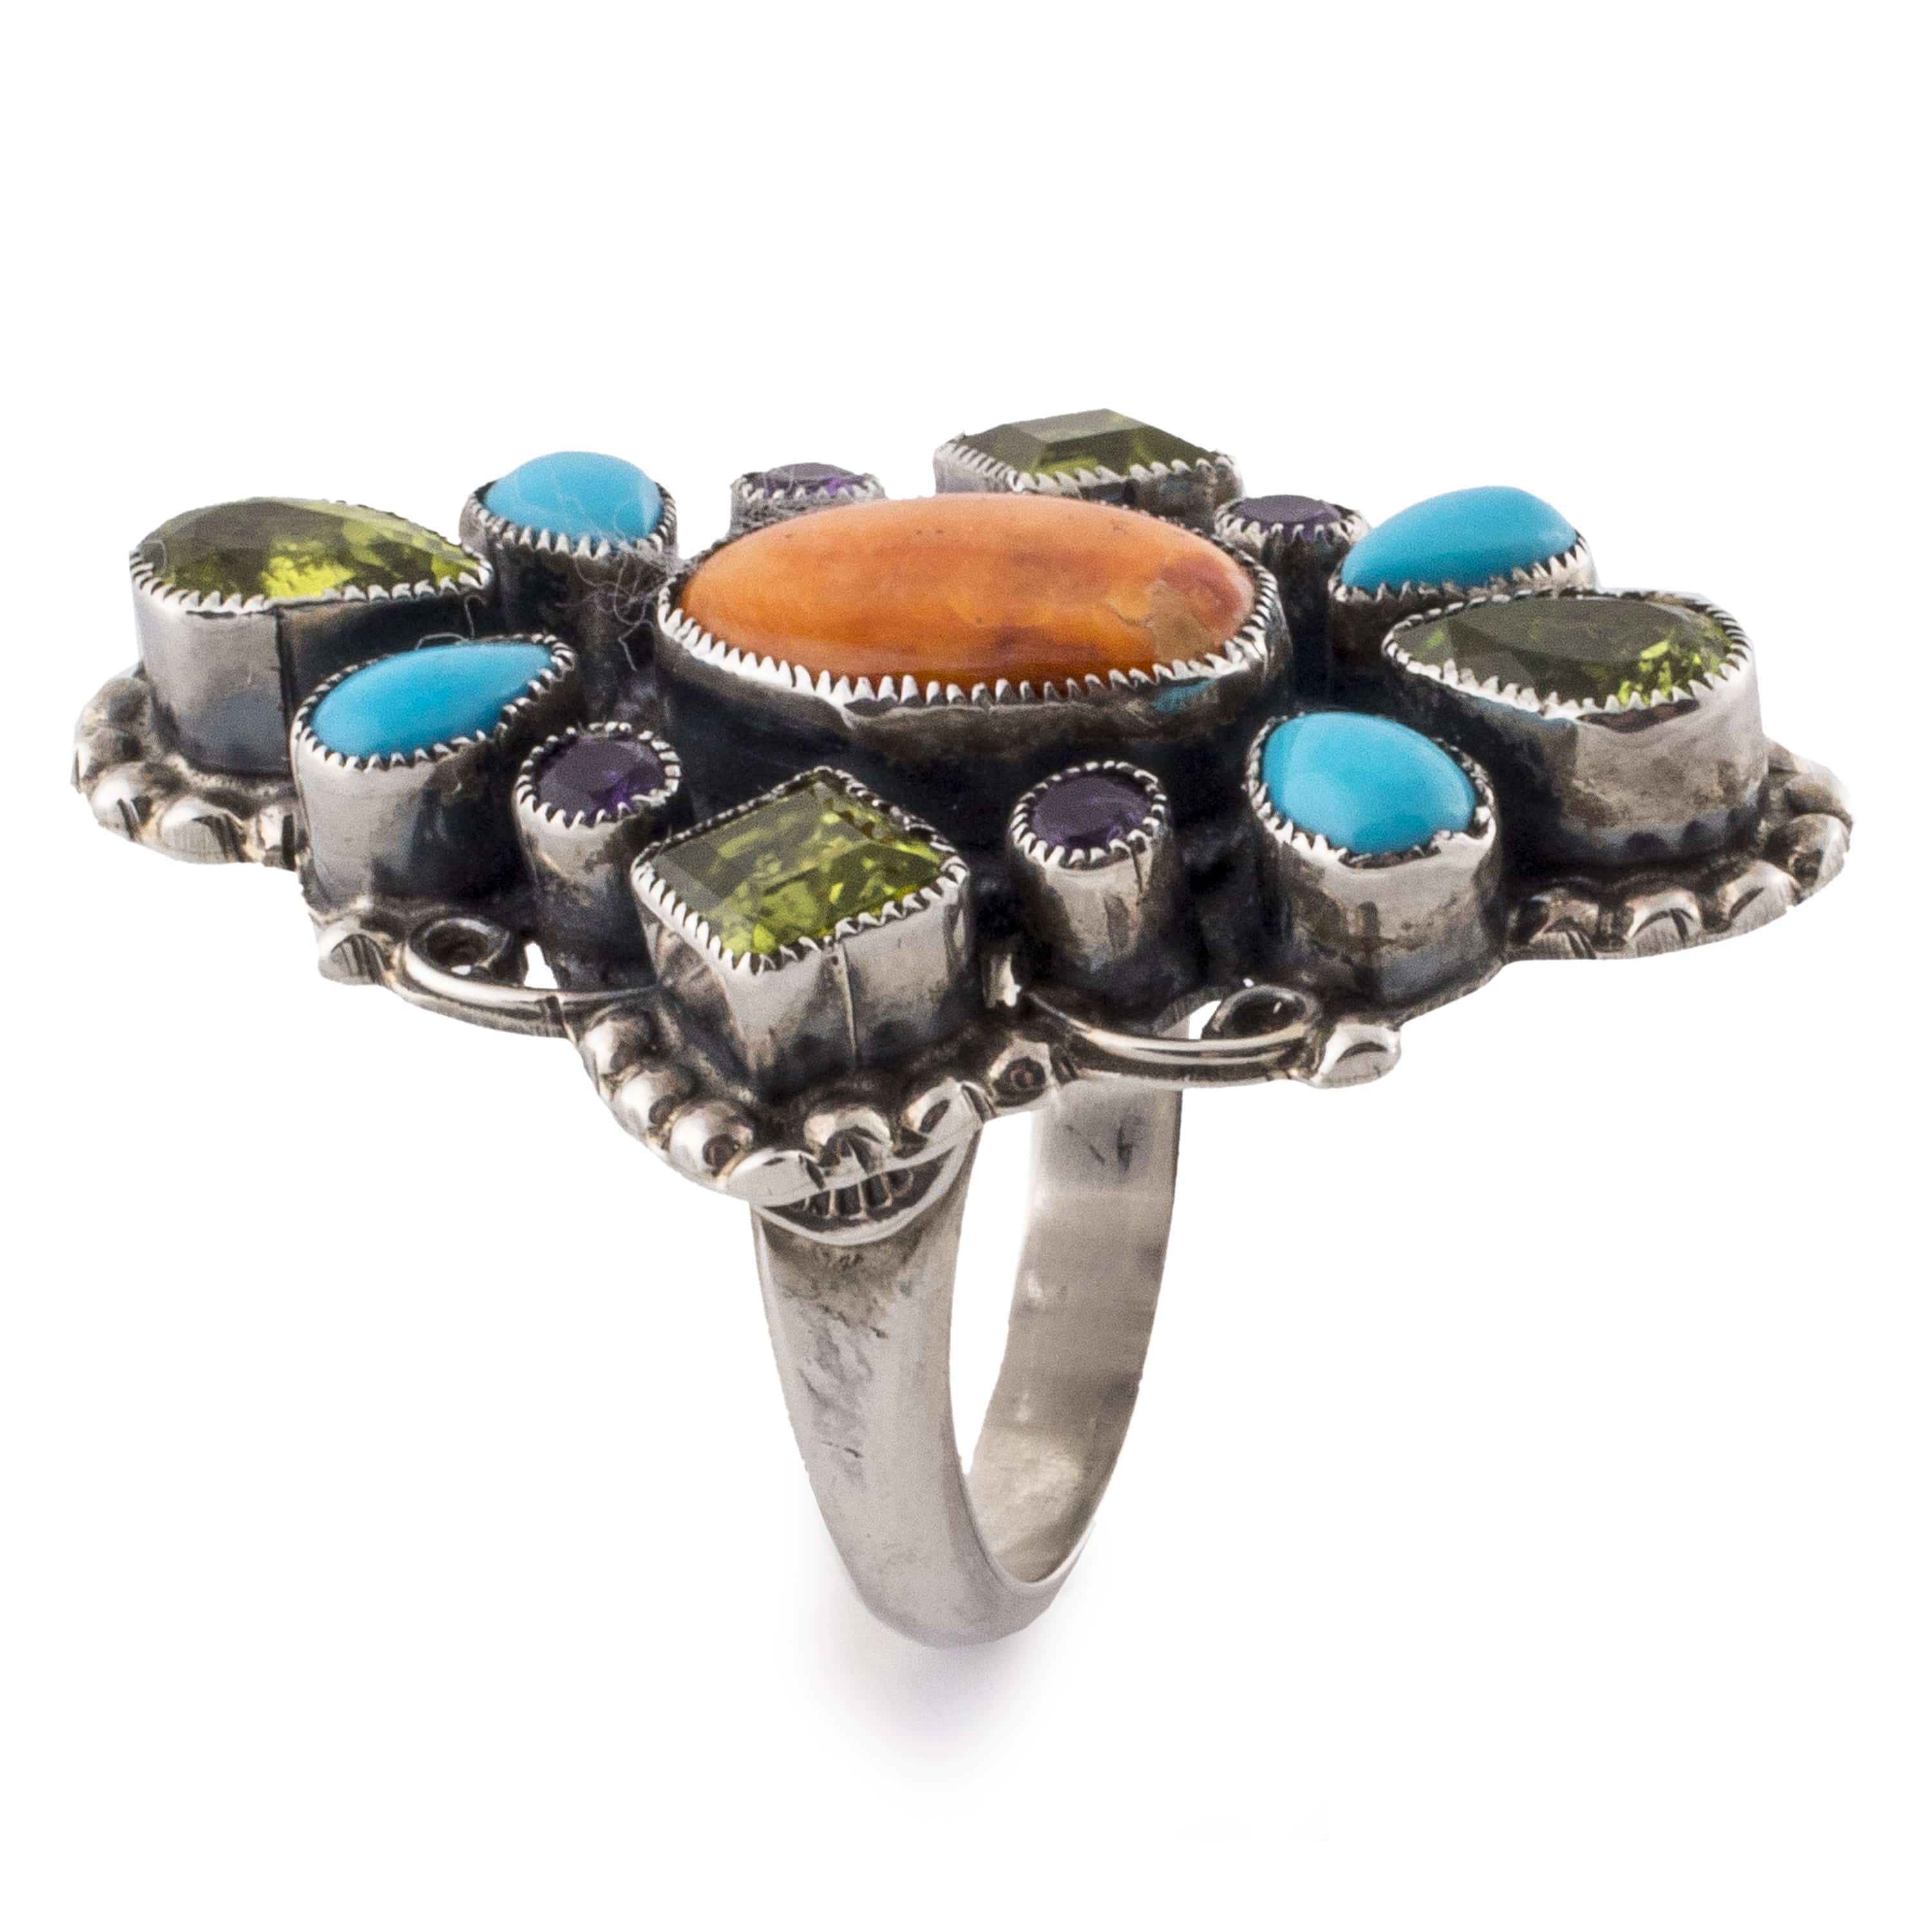 Kalifano Native American Jewelry 8.5 Leo Feeney Sleeping Beauty Turquoise, Spiny Oyster Shell , Amethyst, and Peridot USA Native American Made 925 Sterling Silver Ring NAR1500.010.85